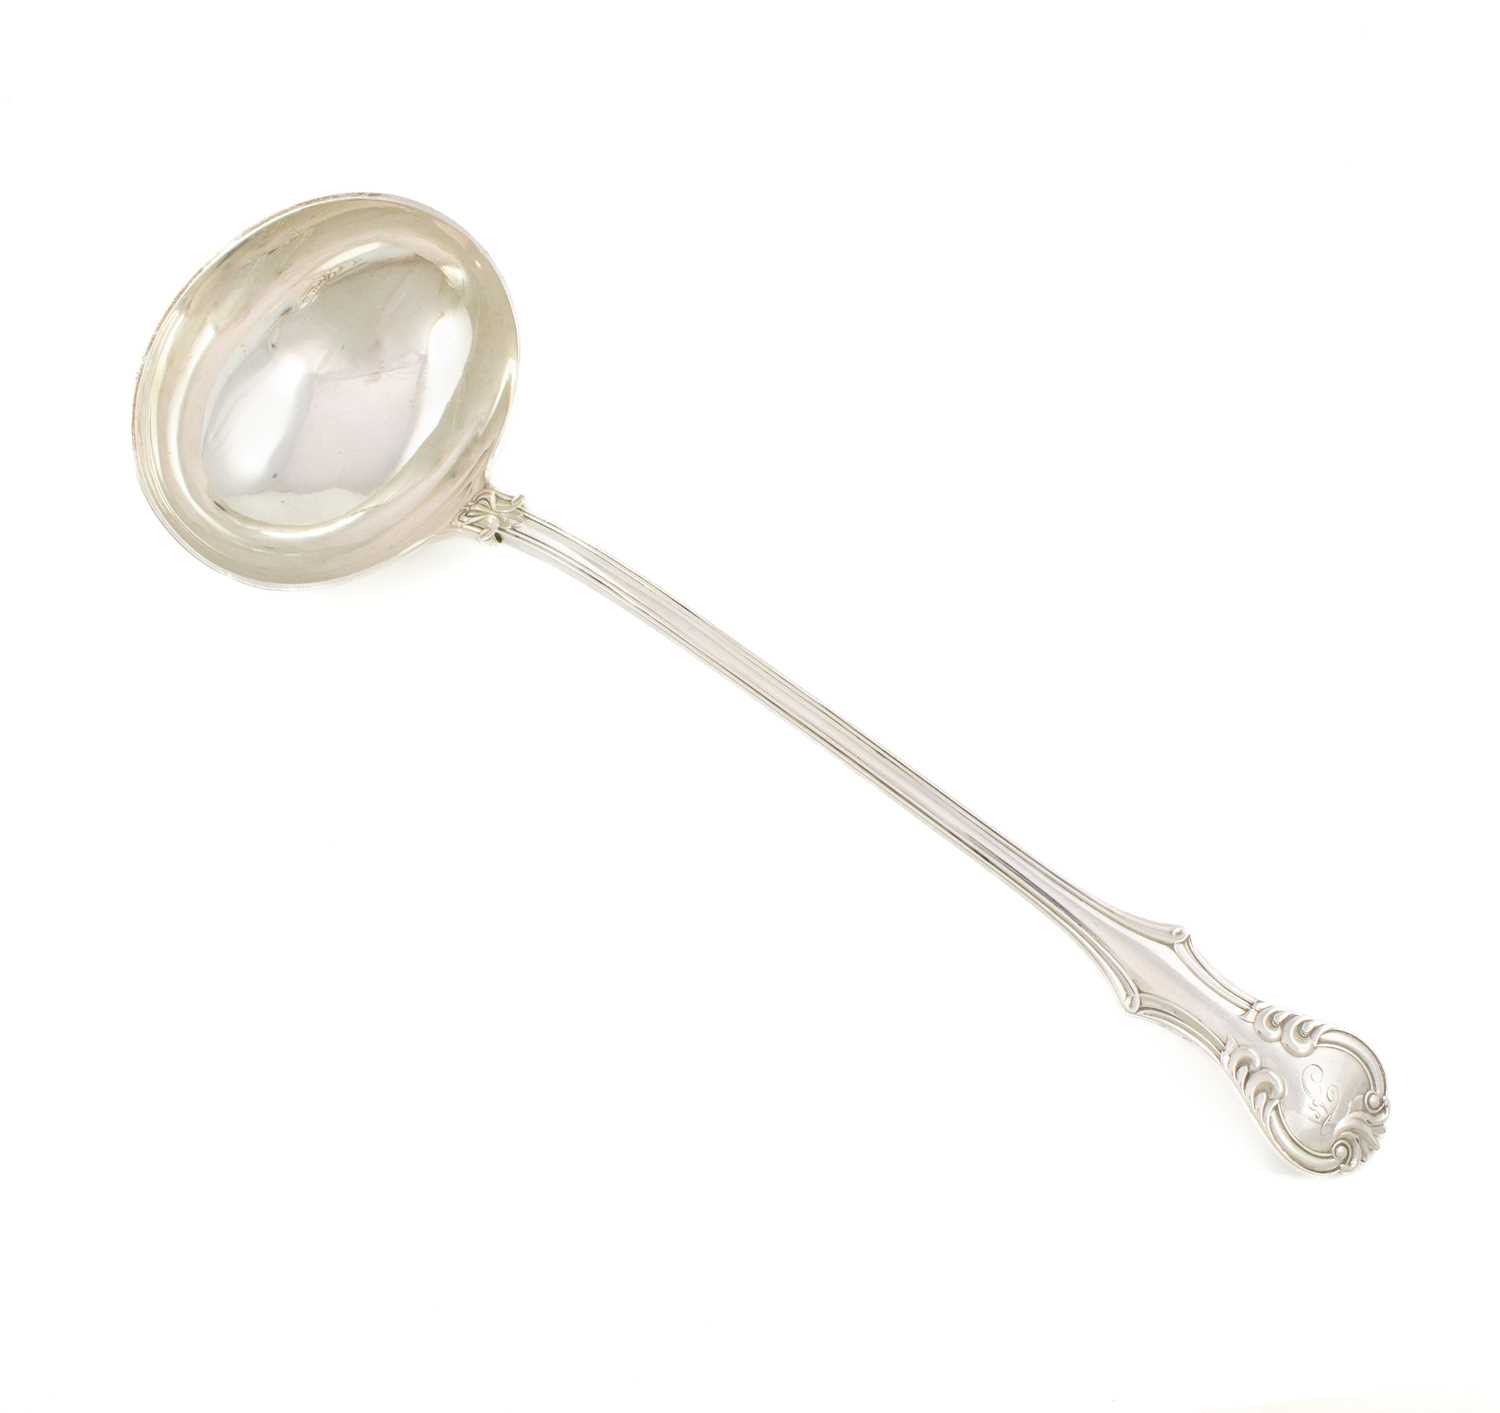 A Victorian silver Victoria pattern soup ladle, by James & Josiah Williams, Exeter 1862, with an